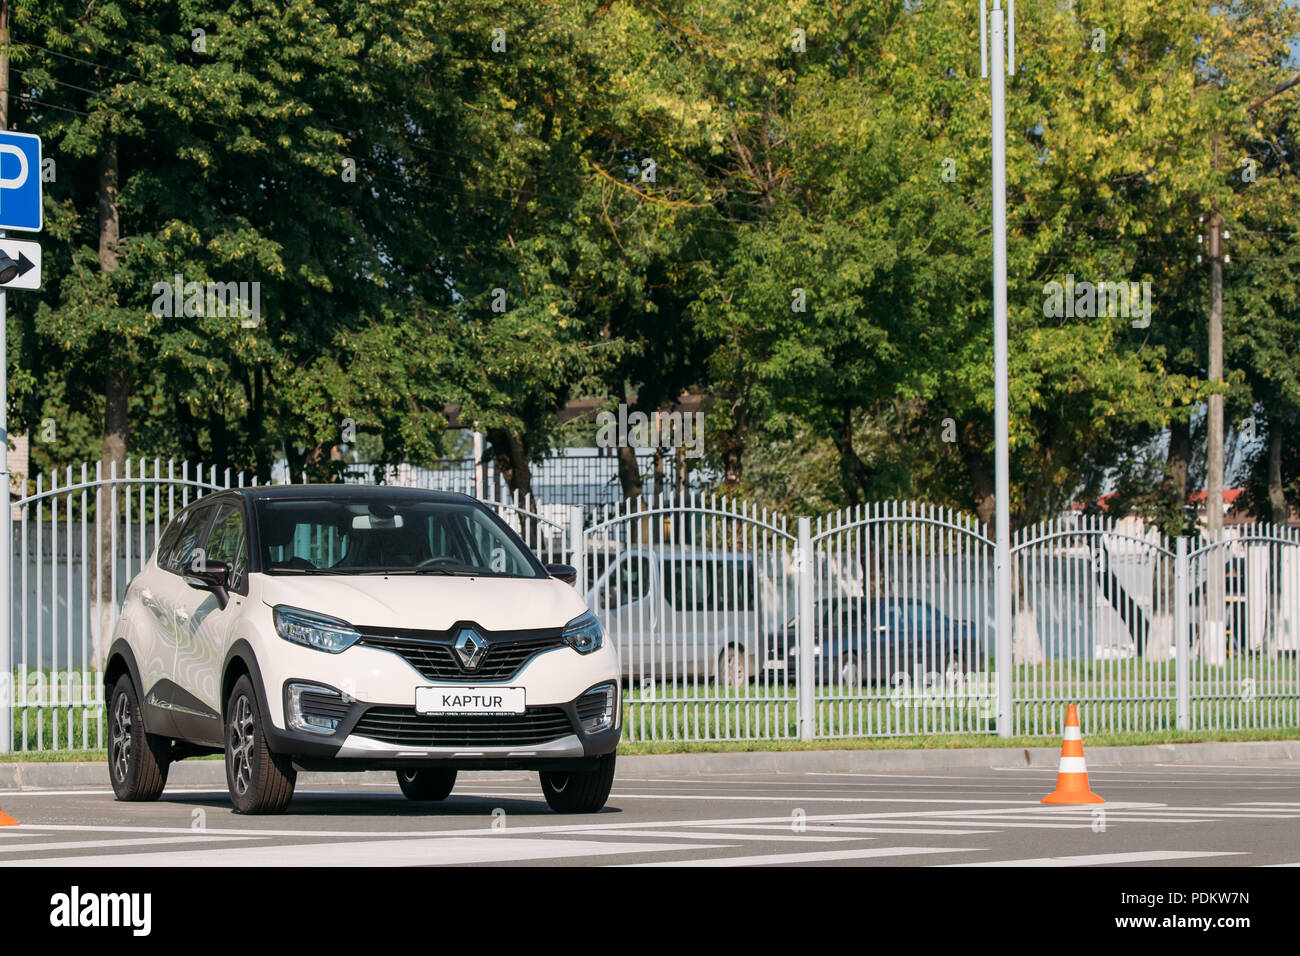 Gomel, Belarus - June 31, 2018: White Color Renault Kaptur Car Is The Subcompact Crossover Parking In Street. Renault Kaptur Produced Jointly By Renau Stock Photo